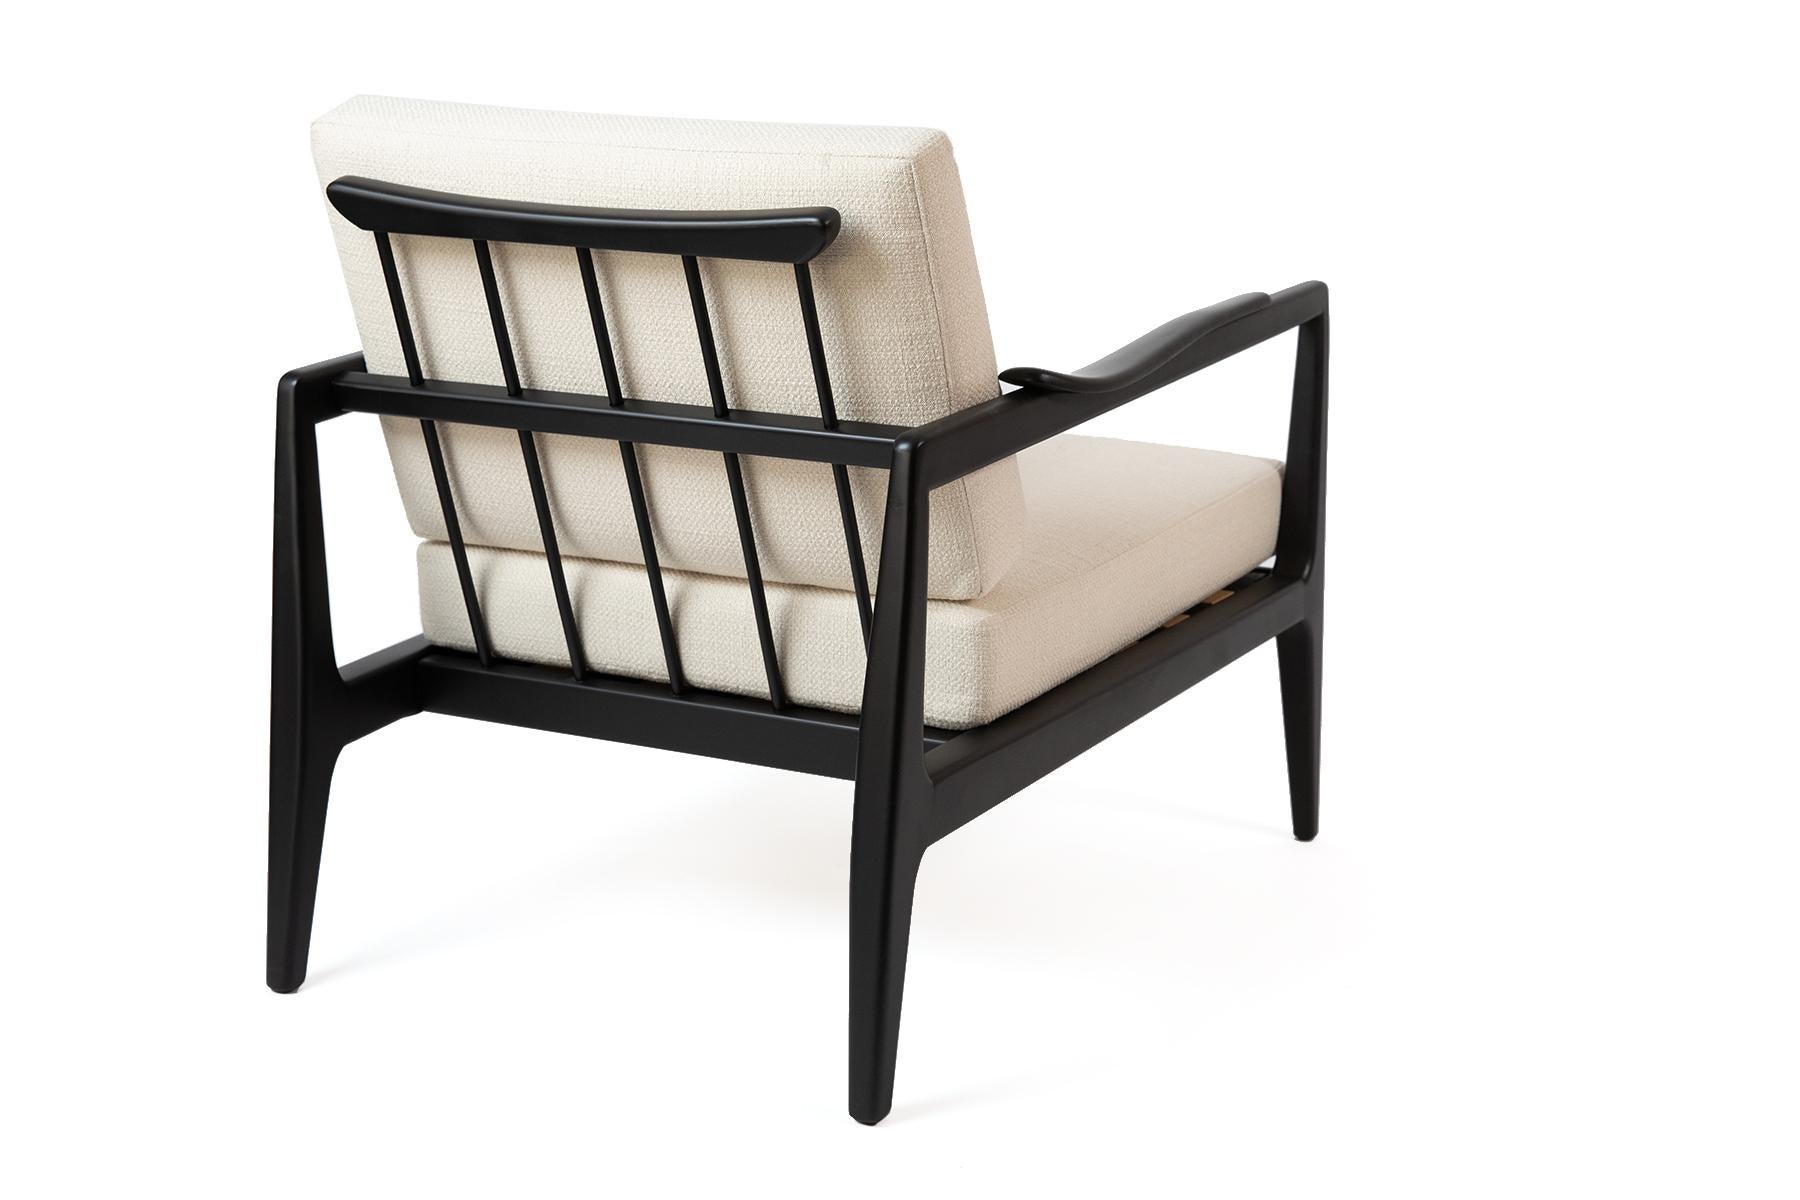 American Edmond Spence Pair of Ebonized and Upholstered Lounge Chairs